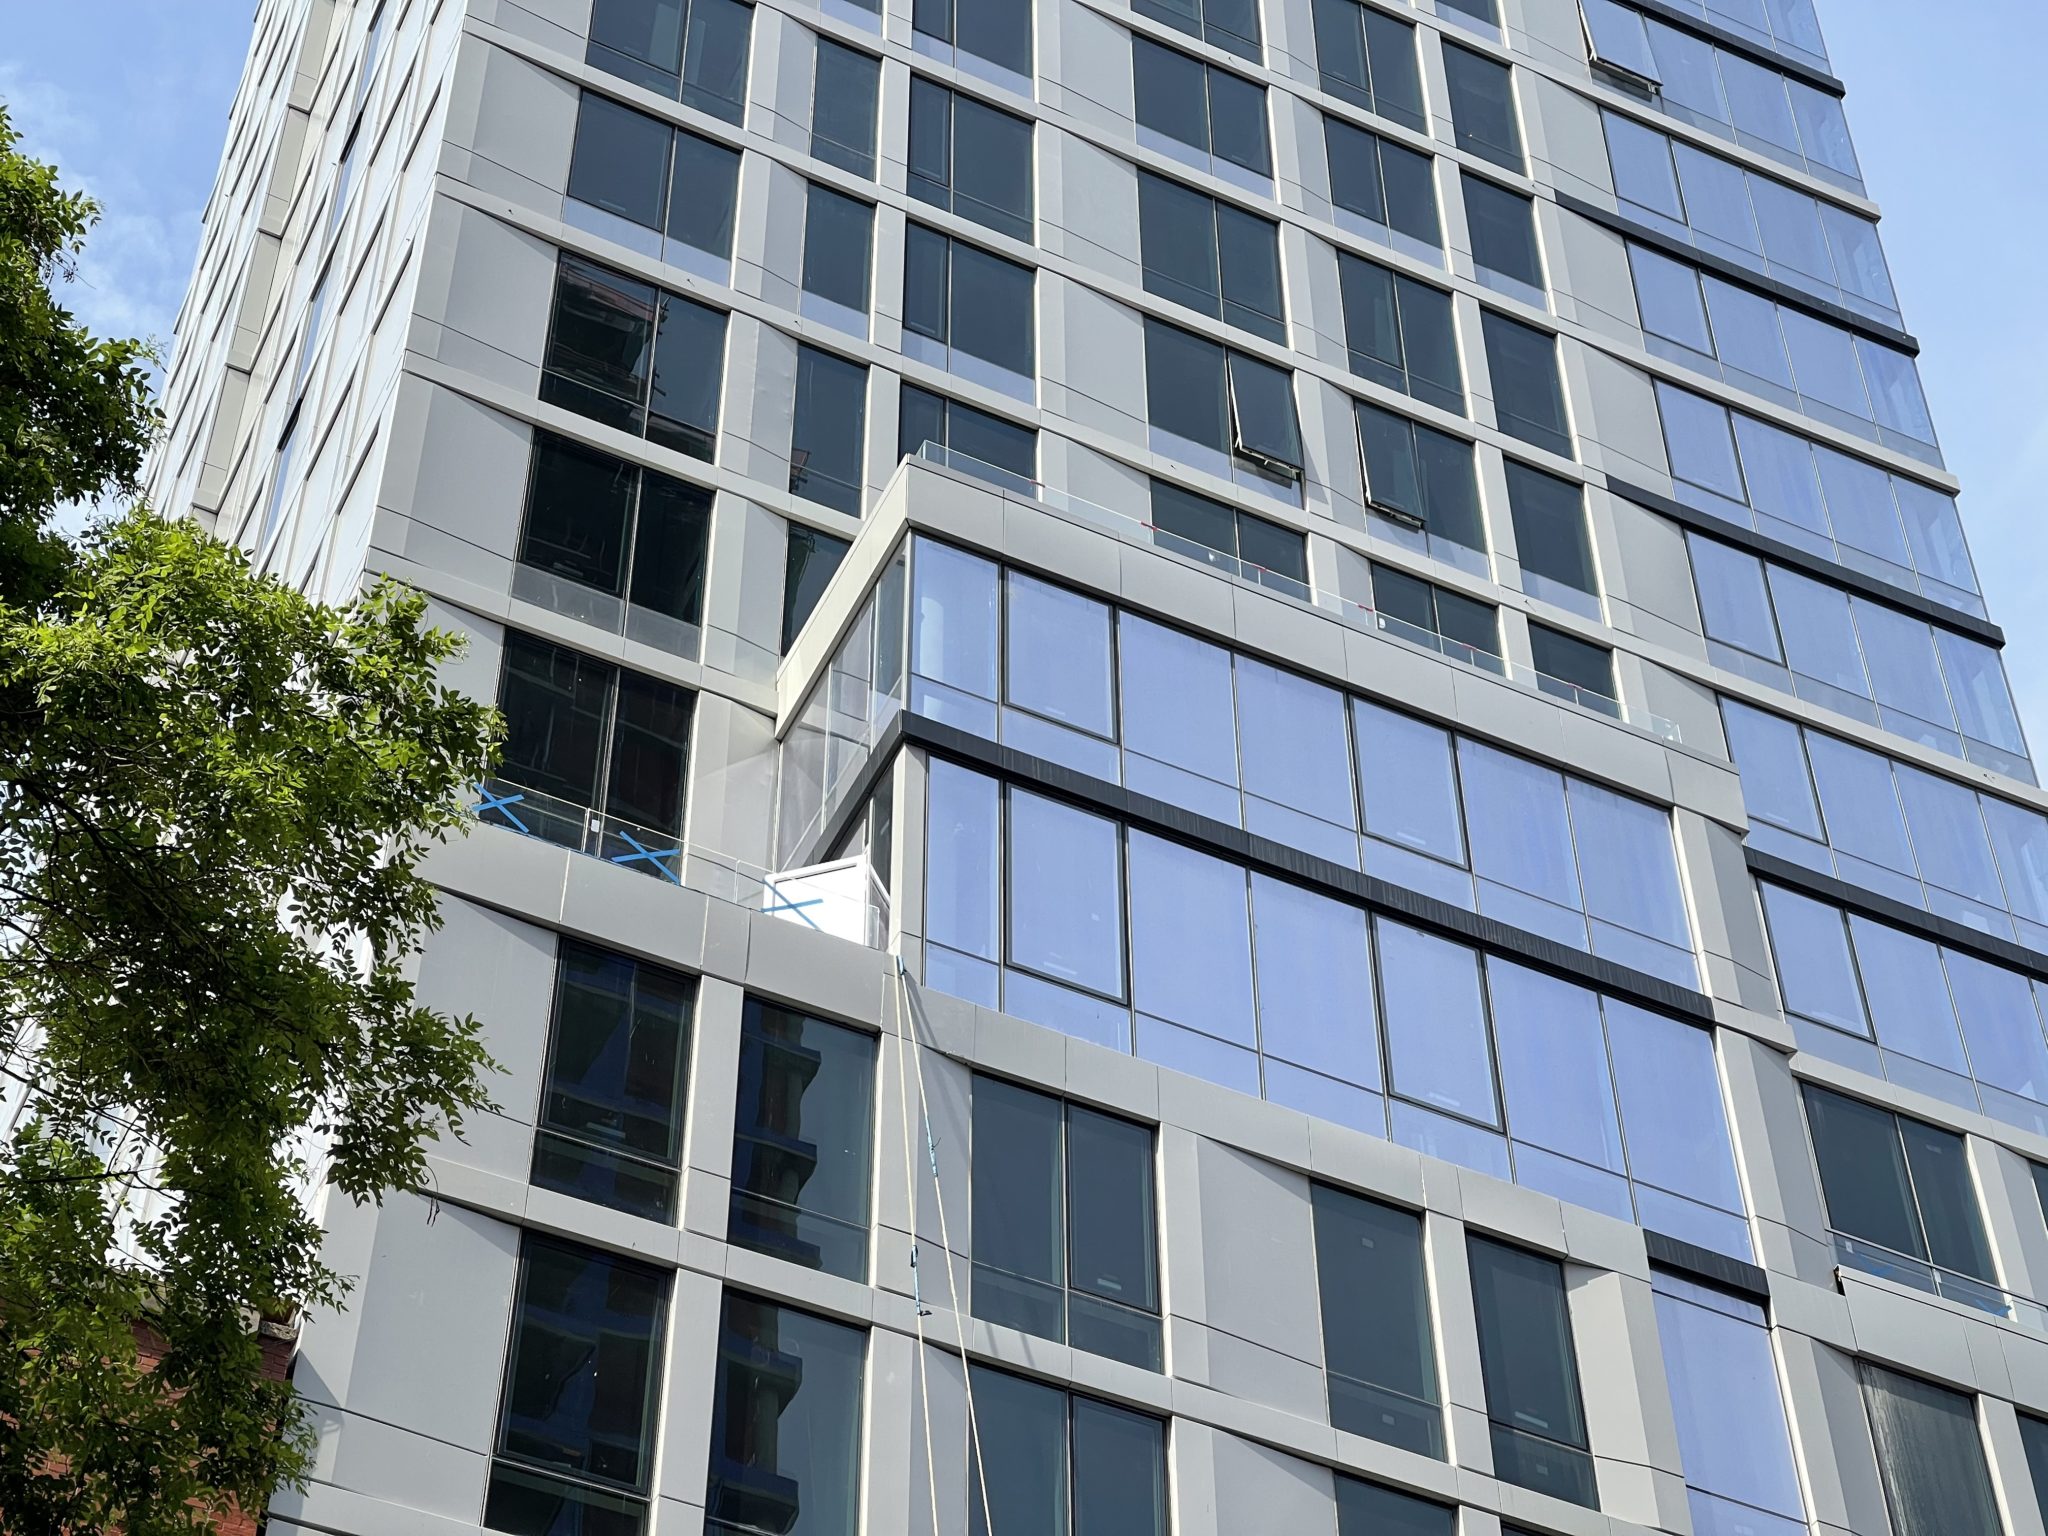 Eastlight Nears Completion at 200 East 34th Street in Kips Bay